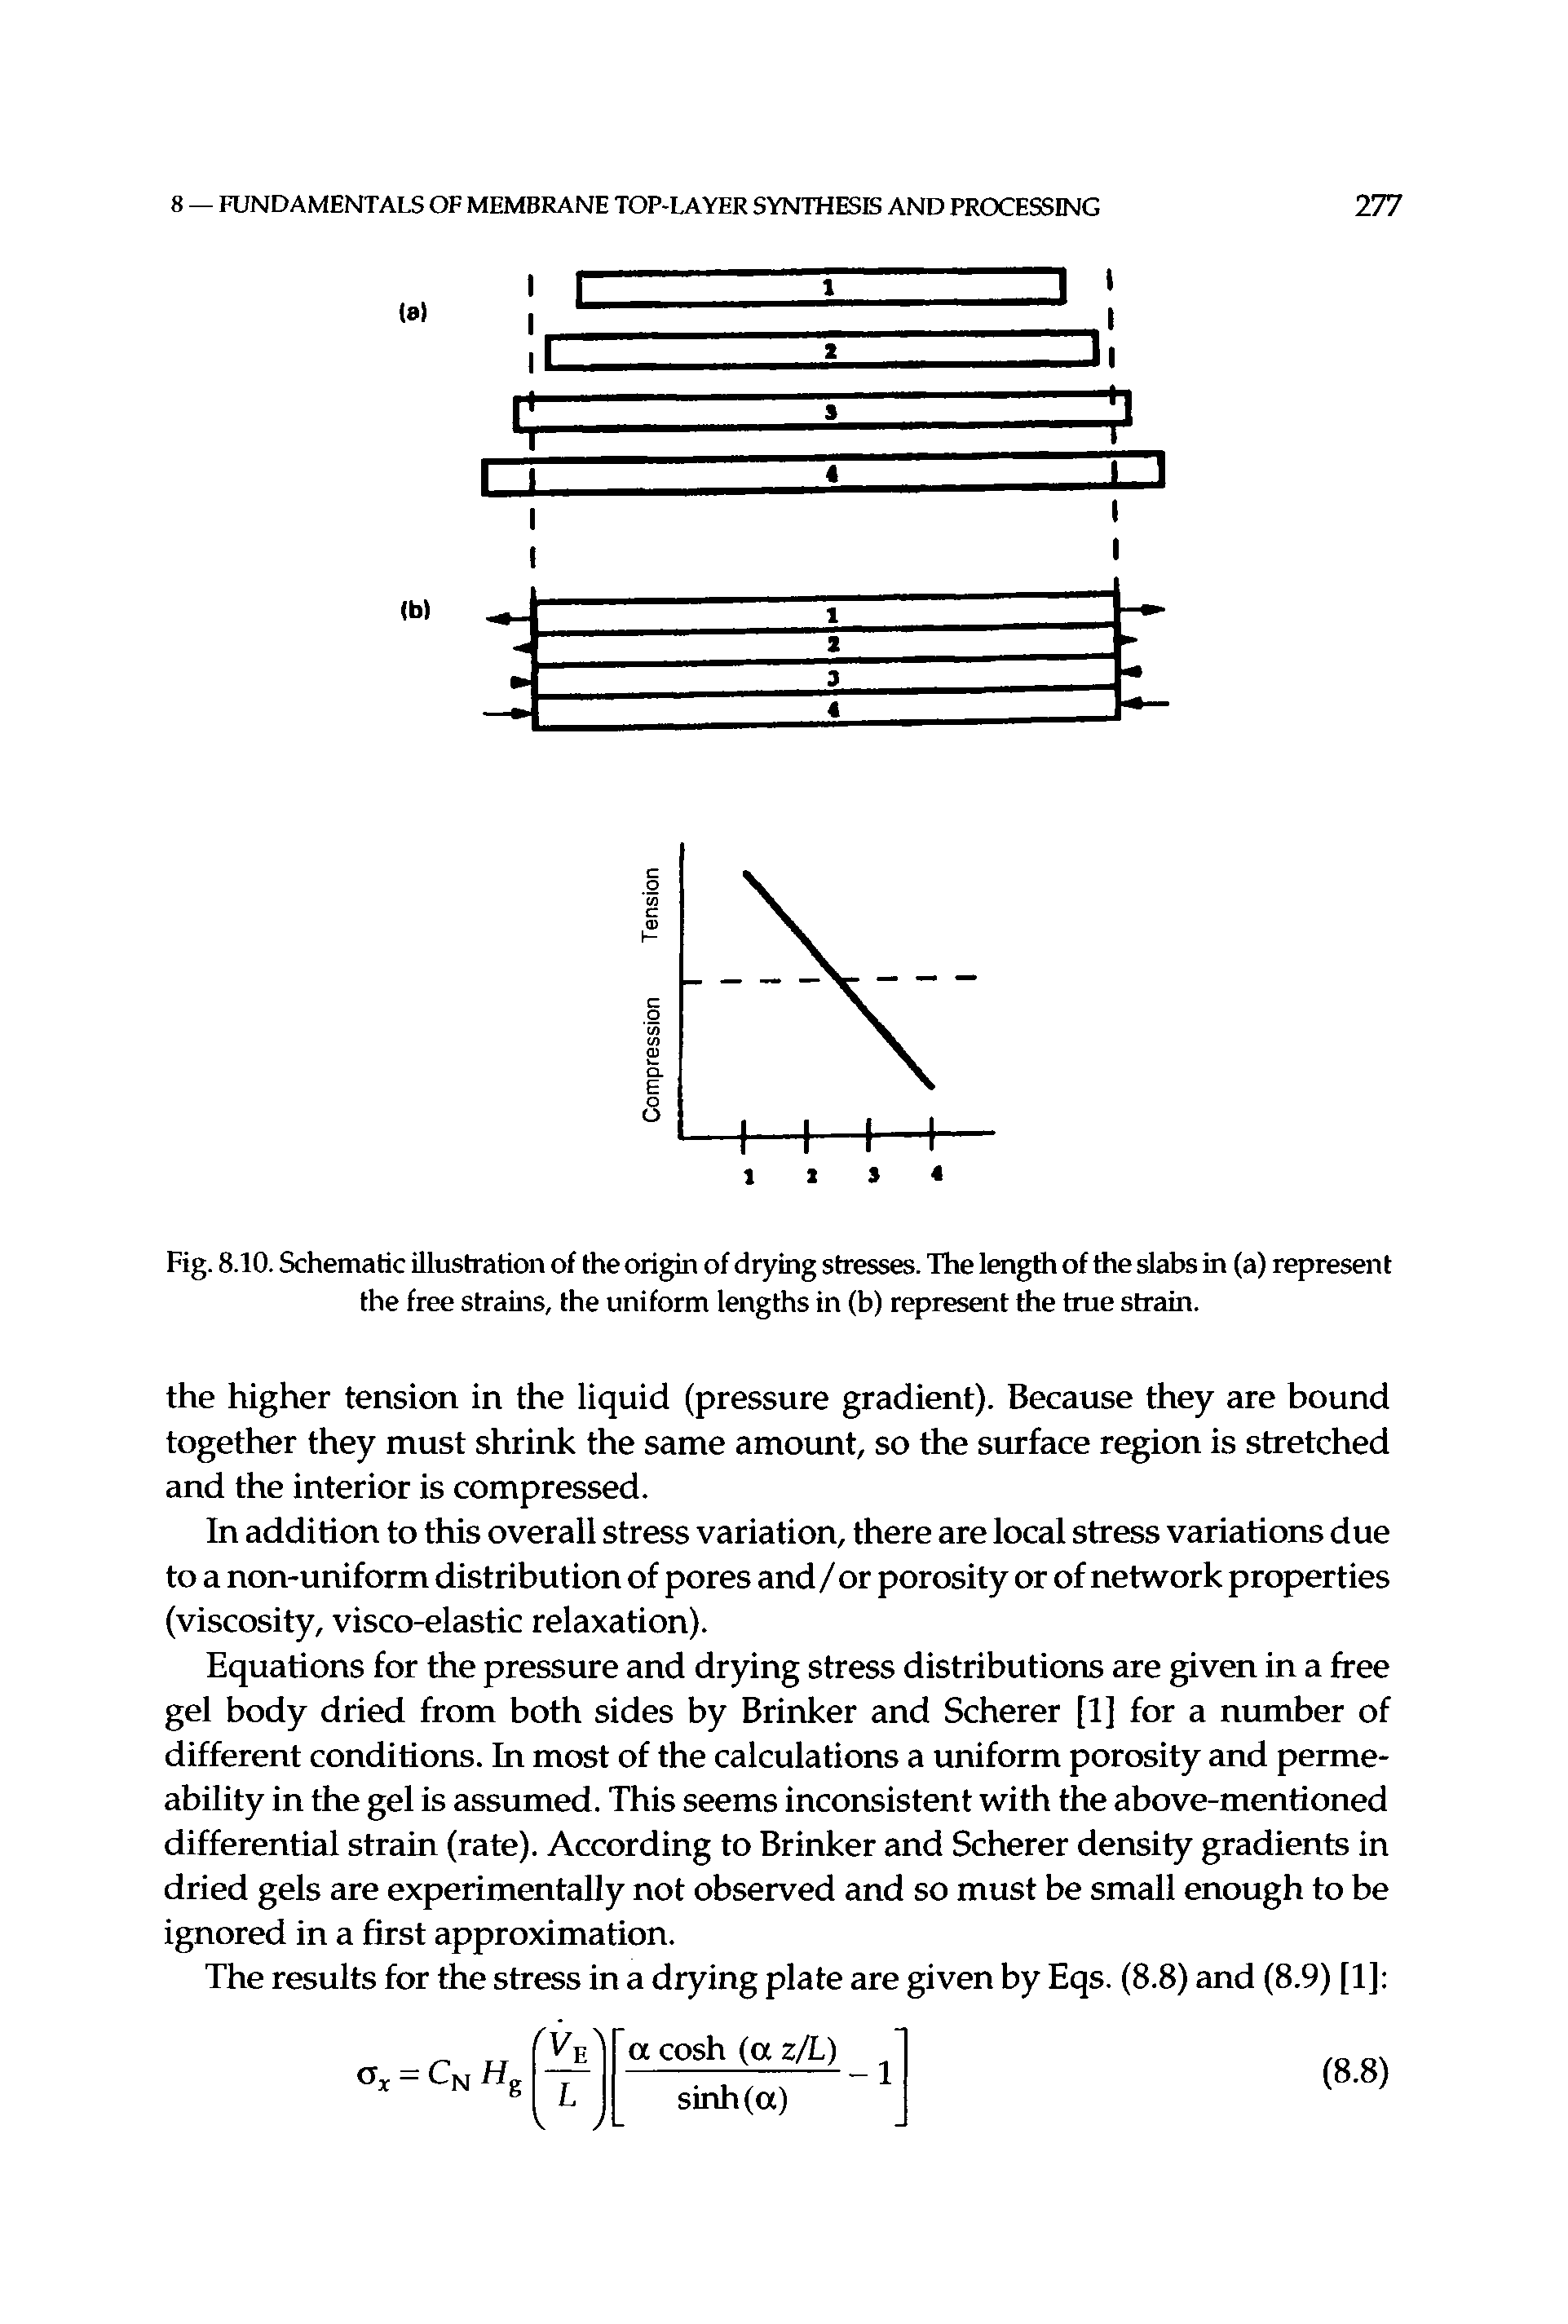 Fig. 8.10. Schematic illustration of the origin of drying stresses. The length of the slabs in (a) represent the free strains, the uniform lengths in (b) represent the true strain.